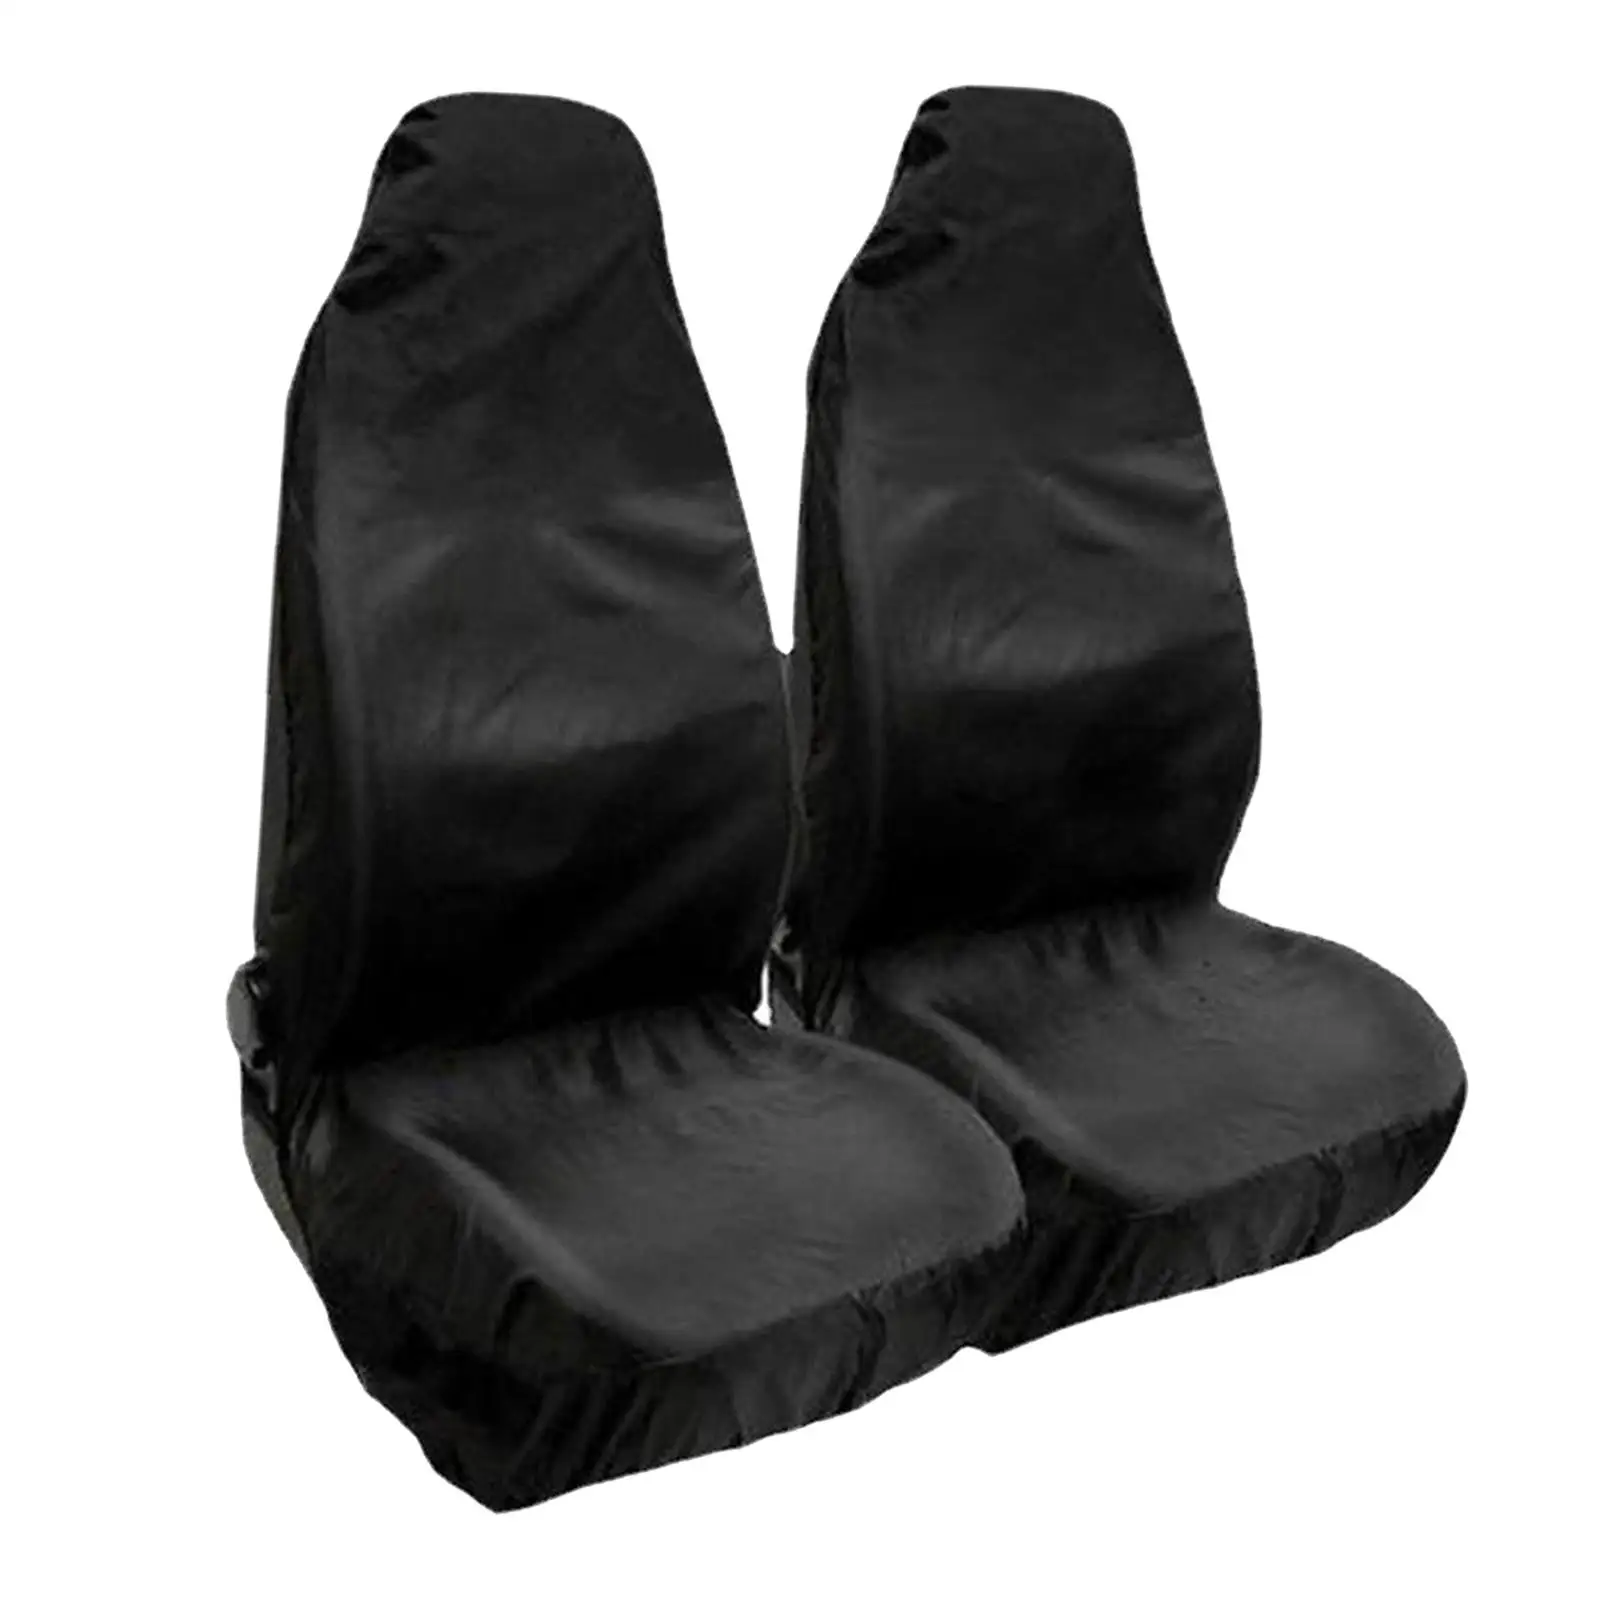 2Pcs Automotive Seat Covers Seat Protection Cover for Sedan Trucks